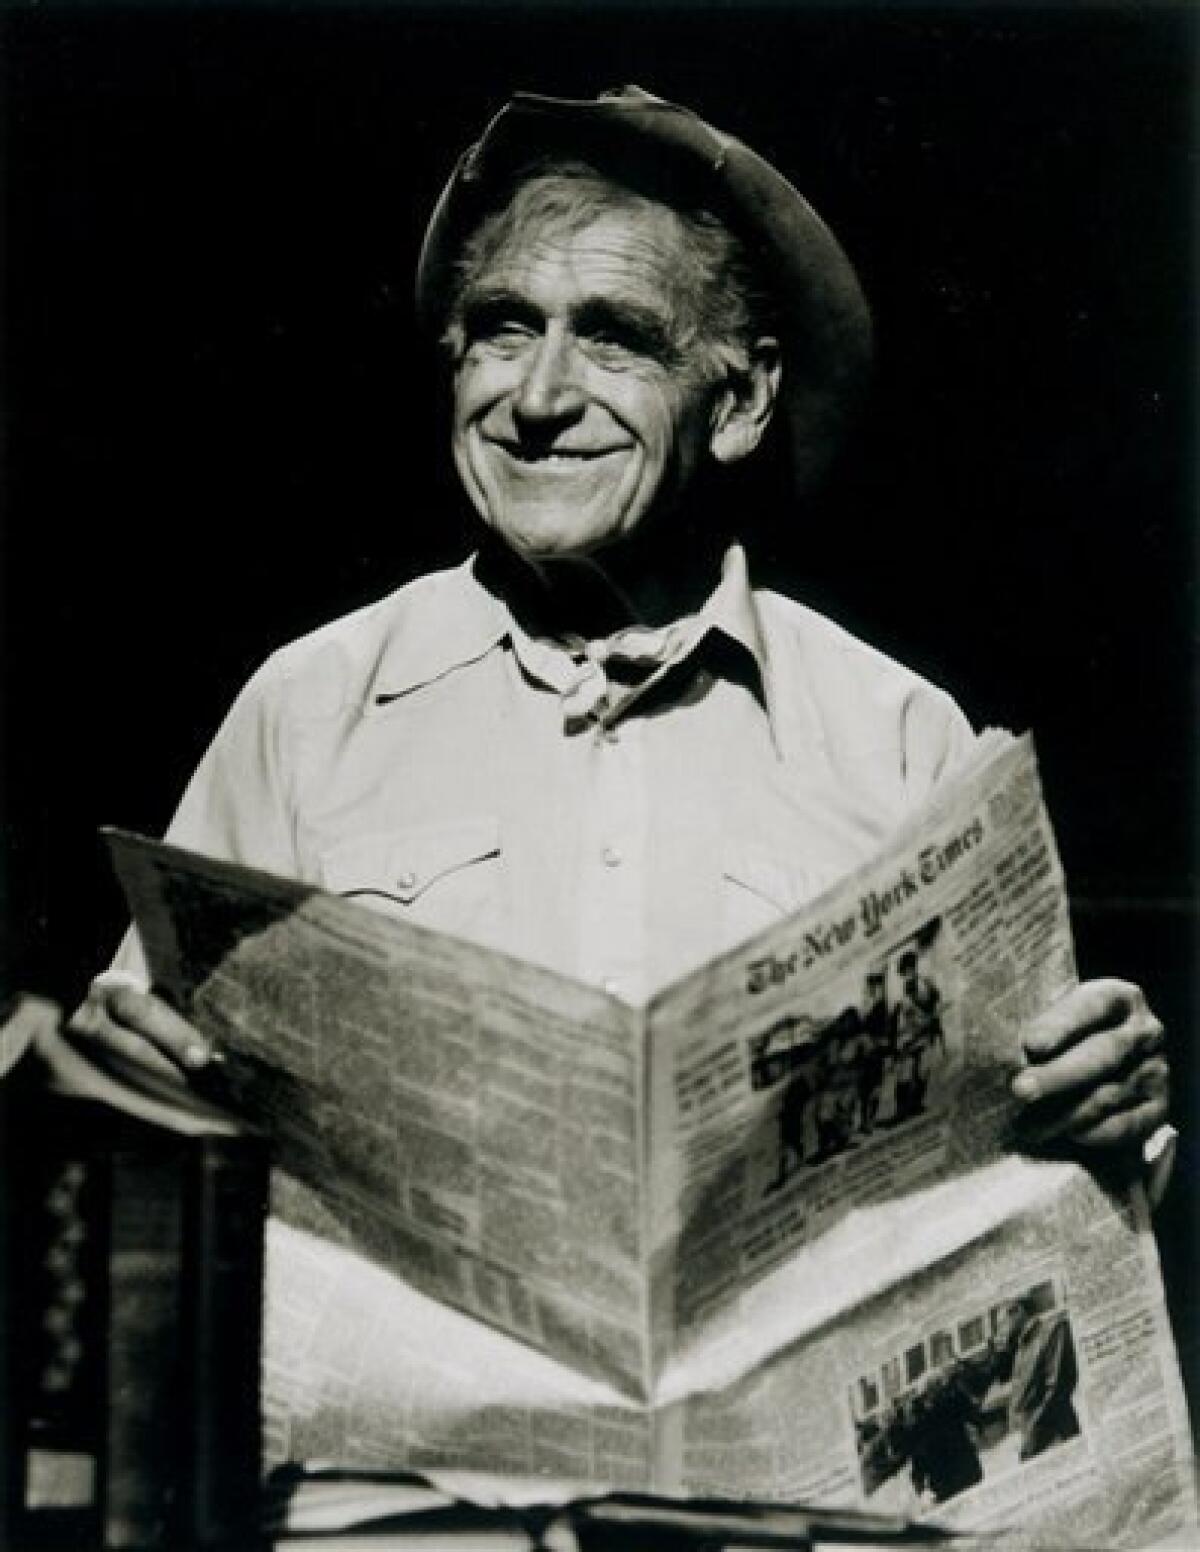 In this Feb. 27, 2000 file photo originally provided by Ford's Theatre, actor James Whitmore plays Will Rogers in "Will Rogers' U.S.A.", a one-man show on the cowboy humorist at Ford's Theatre in Washington. Whitmore, a Tony-and Emmy-winning actor, who was also nominated for an Oscar, died of lung cancer, Friday, Feb. 6, 2009, in his Malibu home, according to his son Steve Whitmore. (AP Photo/Ford's Theatre, Joan Marcus, file)